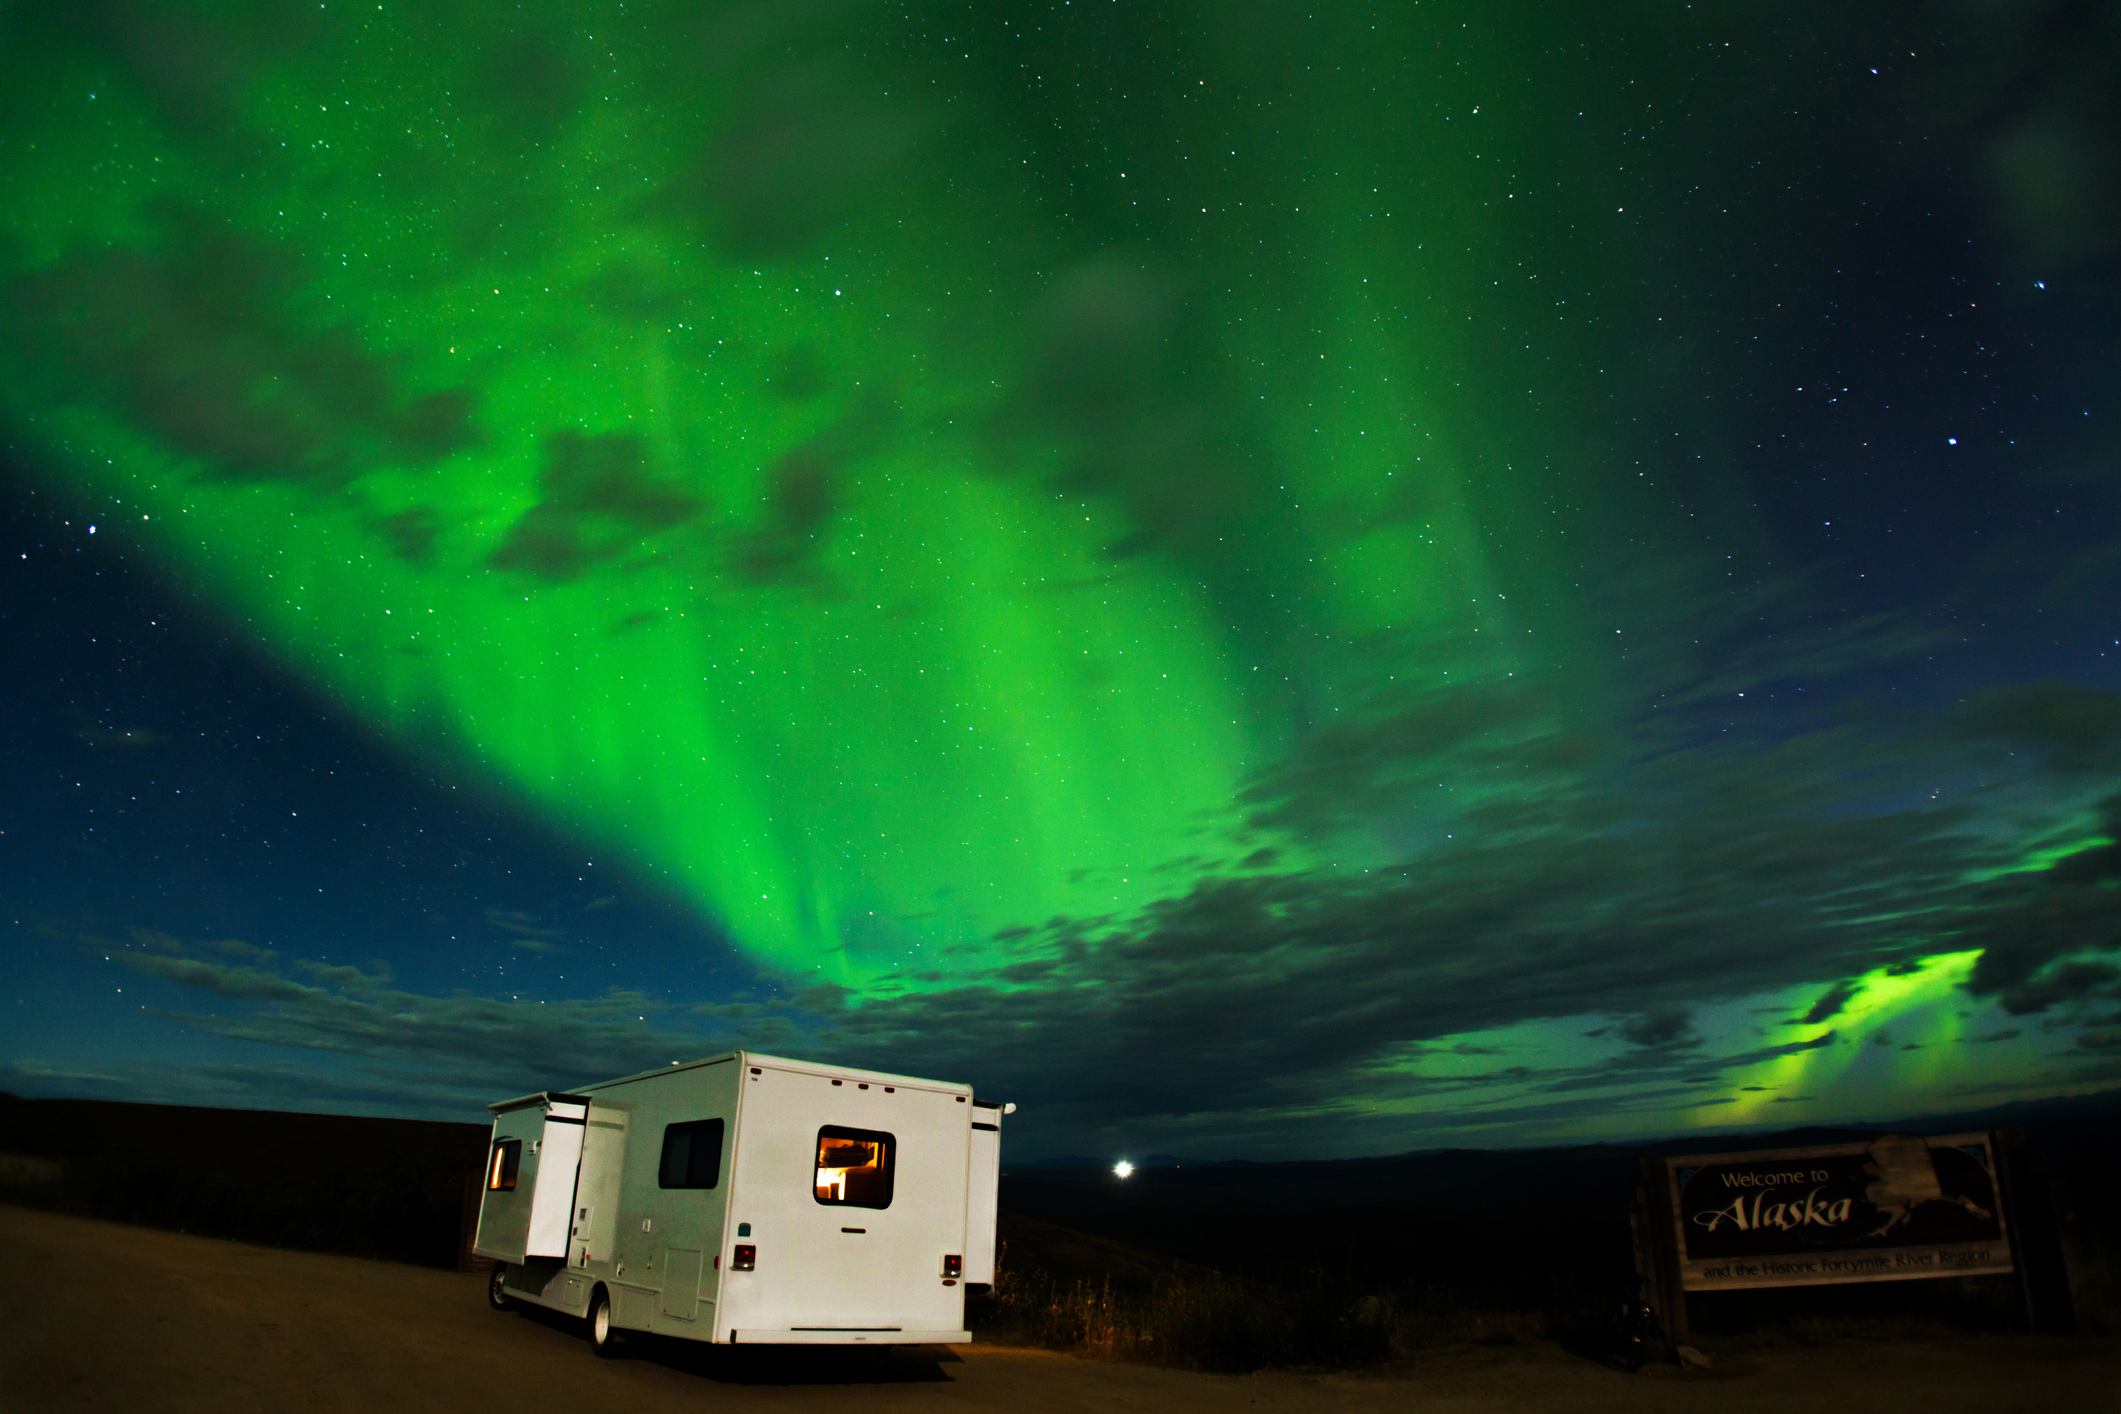 Motorhome parked under the northern lights.